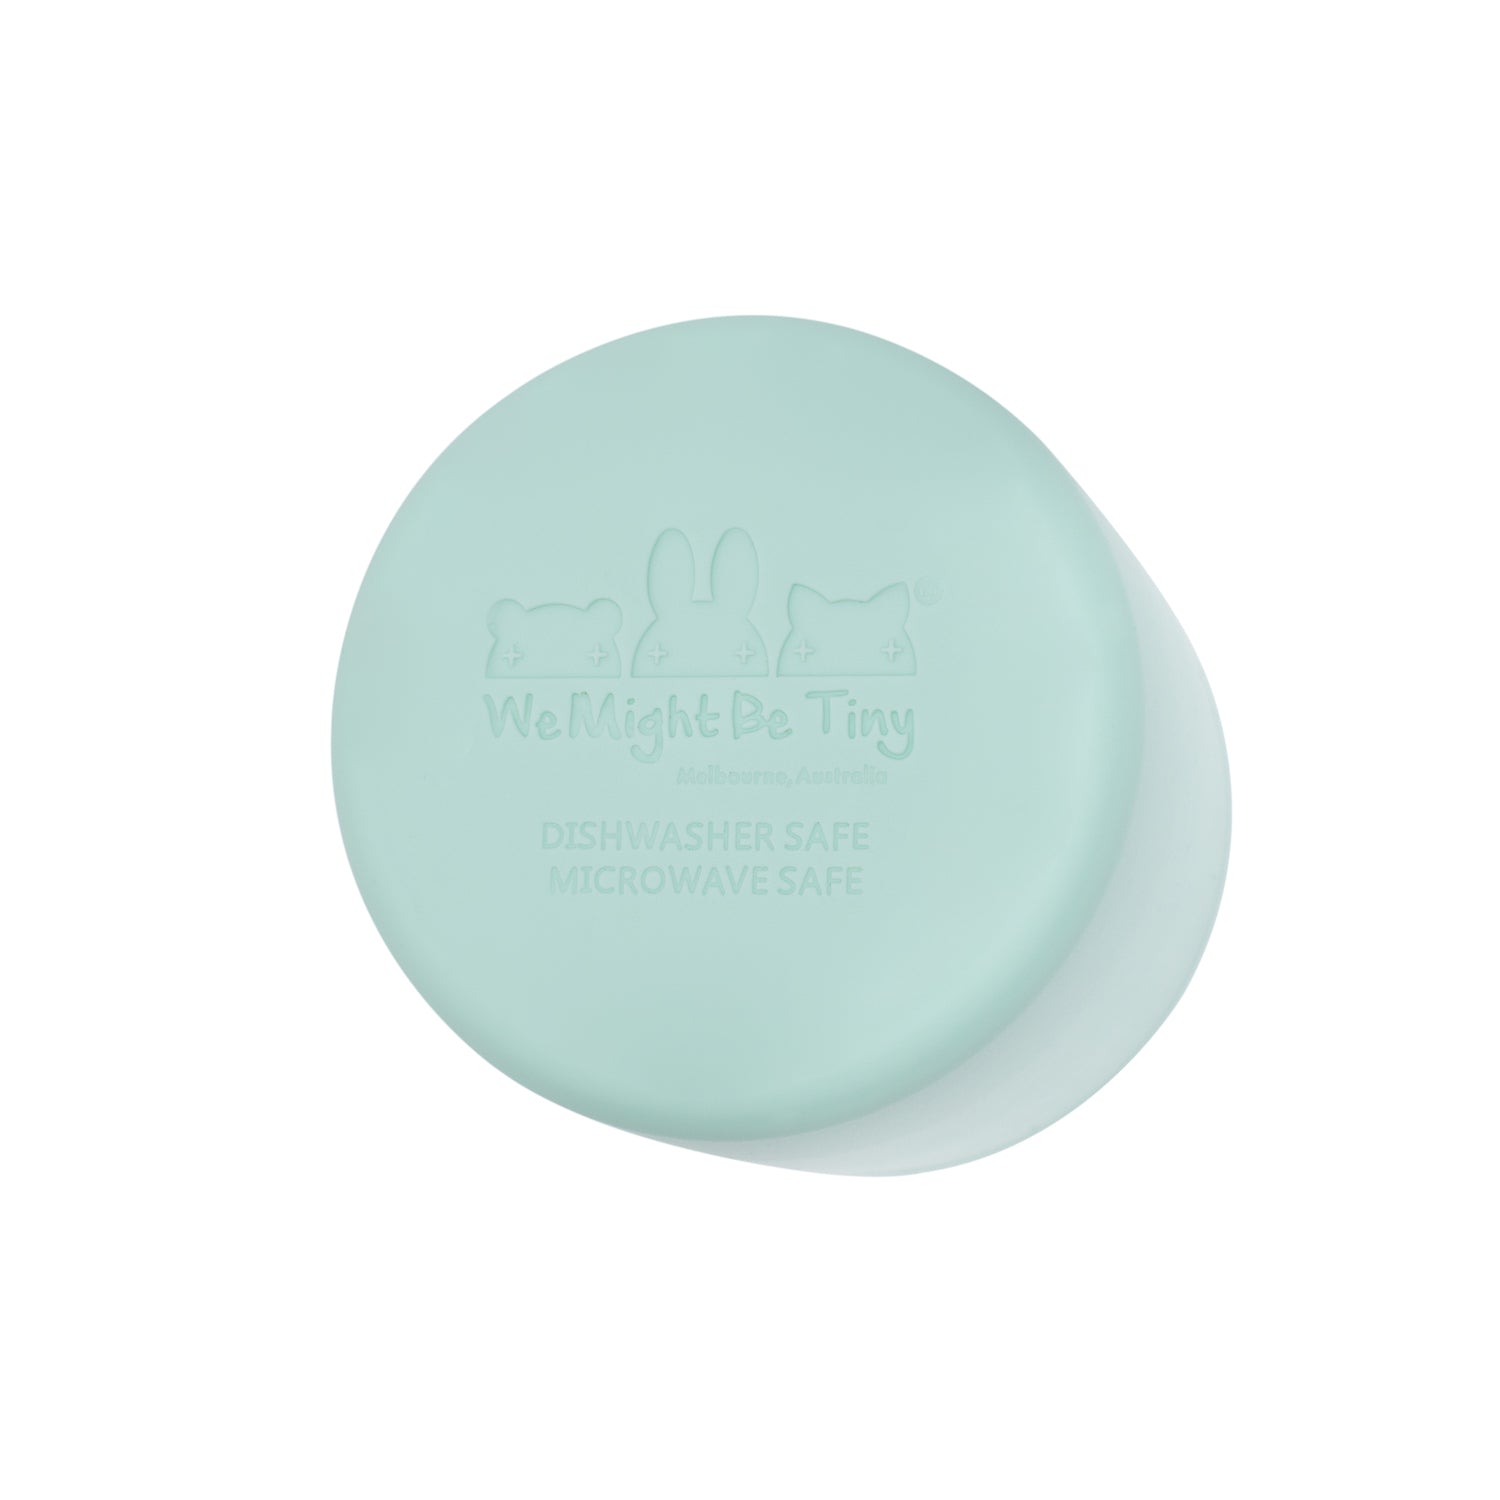 Bottom of mint green silicone cup